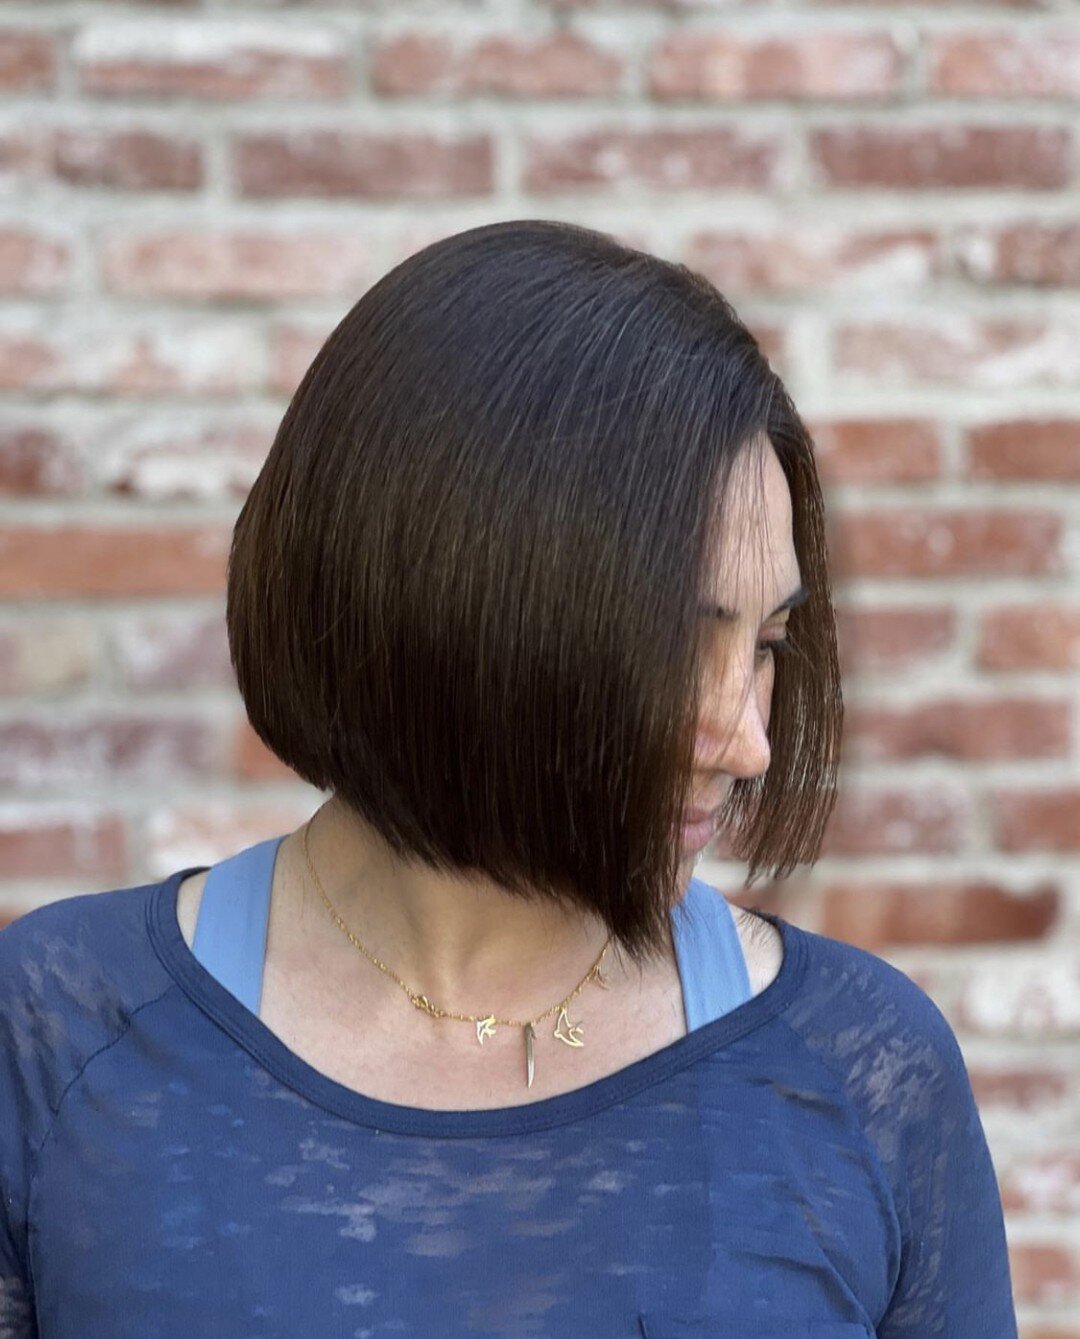 super beautiful bob by our stylist @charlesfoxhair ! he does amazing work, and hes taking new clients ✨ #bobhaircut #bobhaircuts #bobhaircutstyle #bobhaircut✂️✂️✂️ #shorthair #shorthaircut #hair #haircut #HAIRGOALS #hairideas #hairstyle